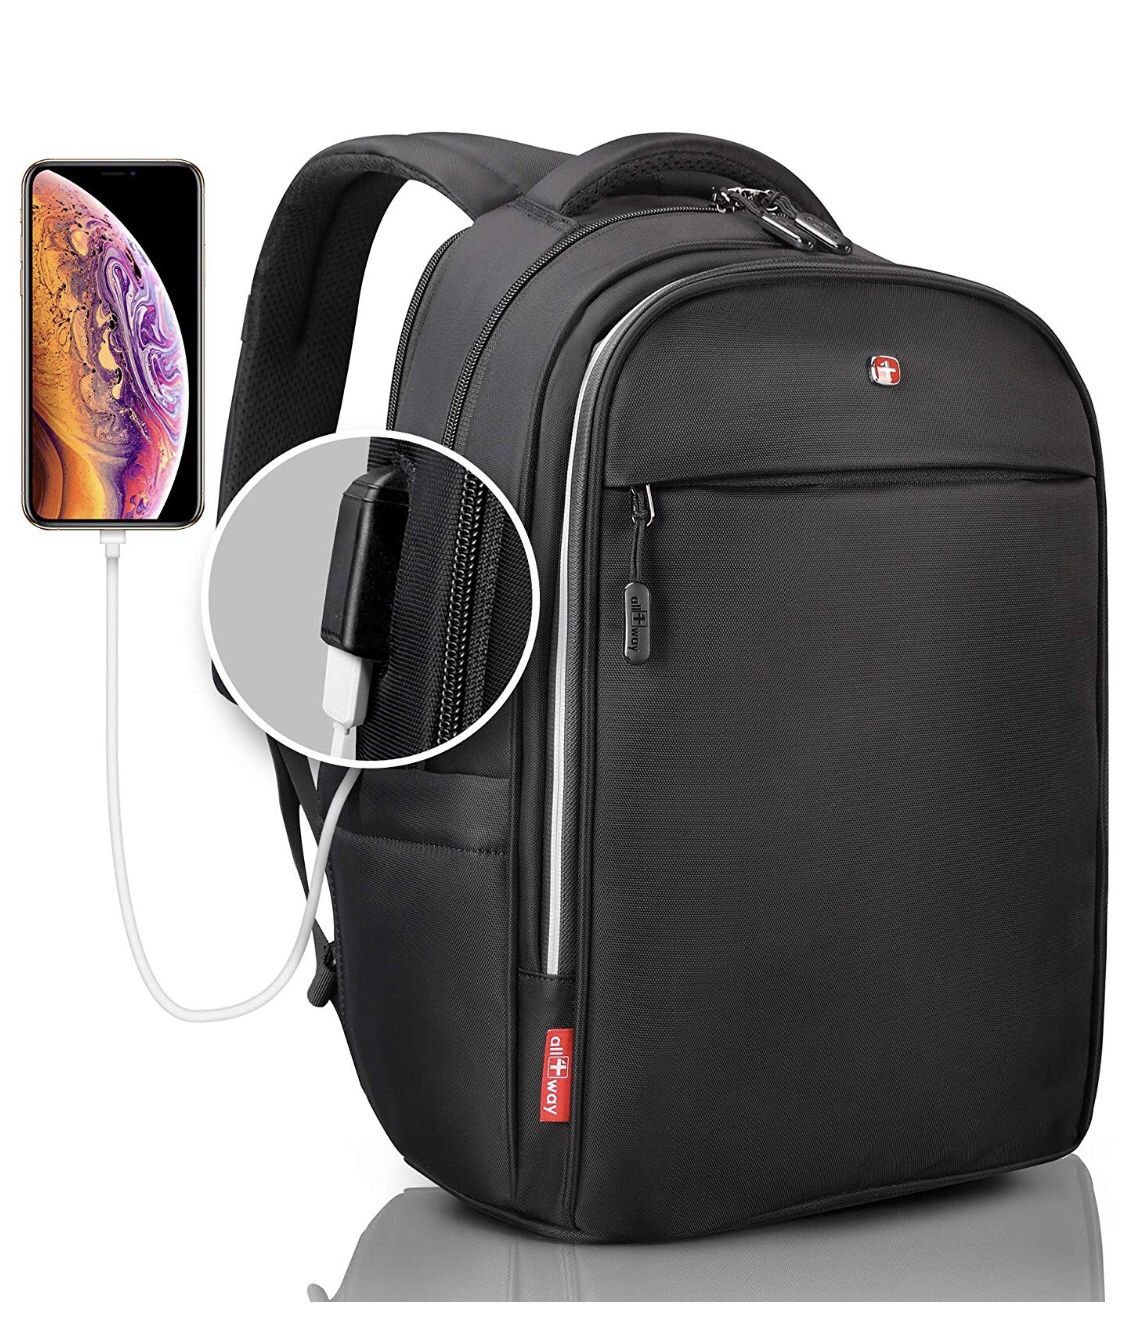 Smart 15.6” laptop backpack. Charge on the go. BRAND NEW.